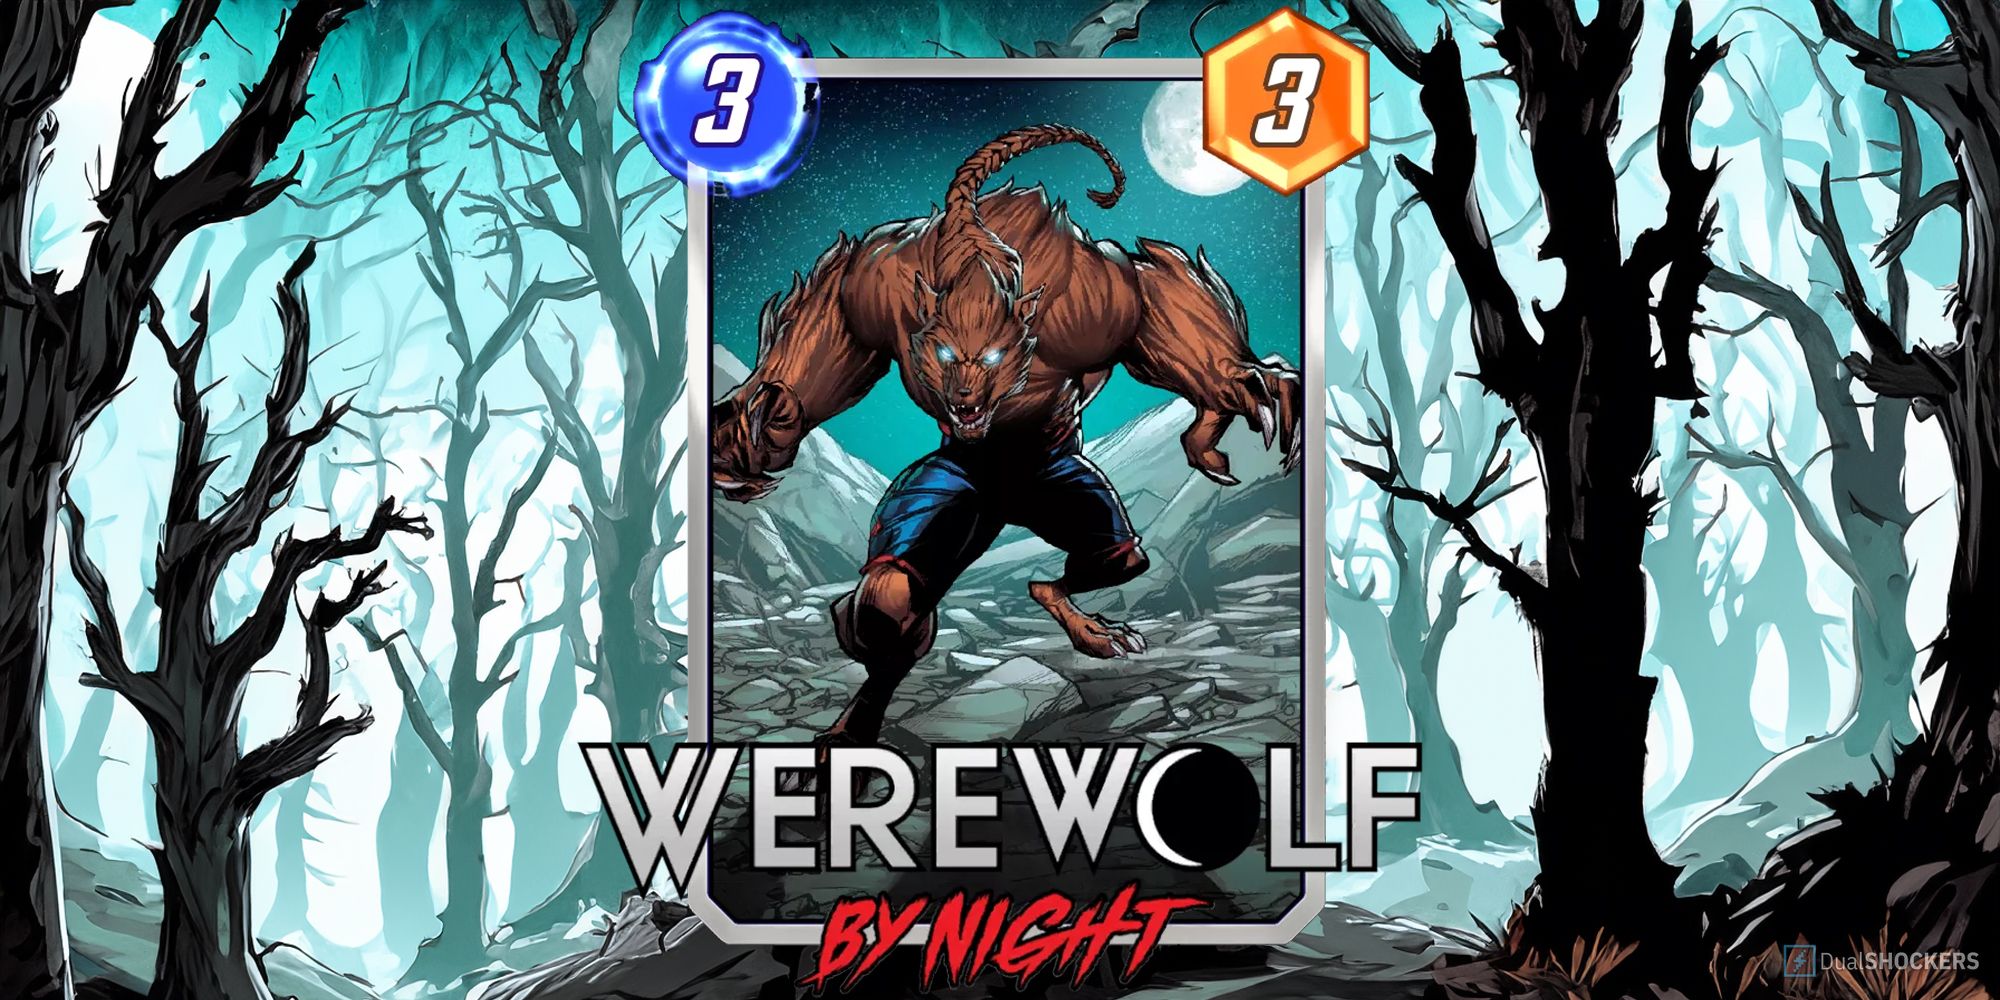 An HONEST REVIEW of WEREWOLF BY NIGHT [Marvel Snap First